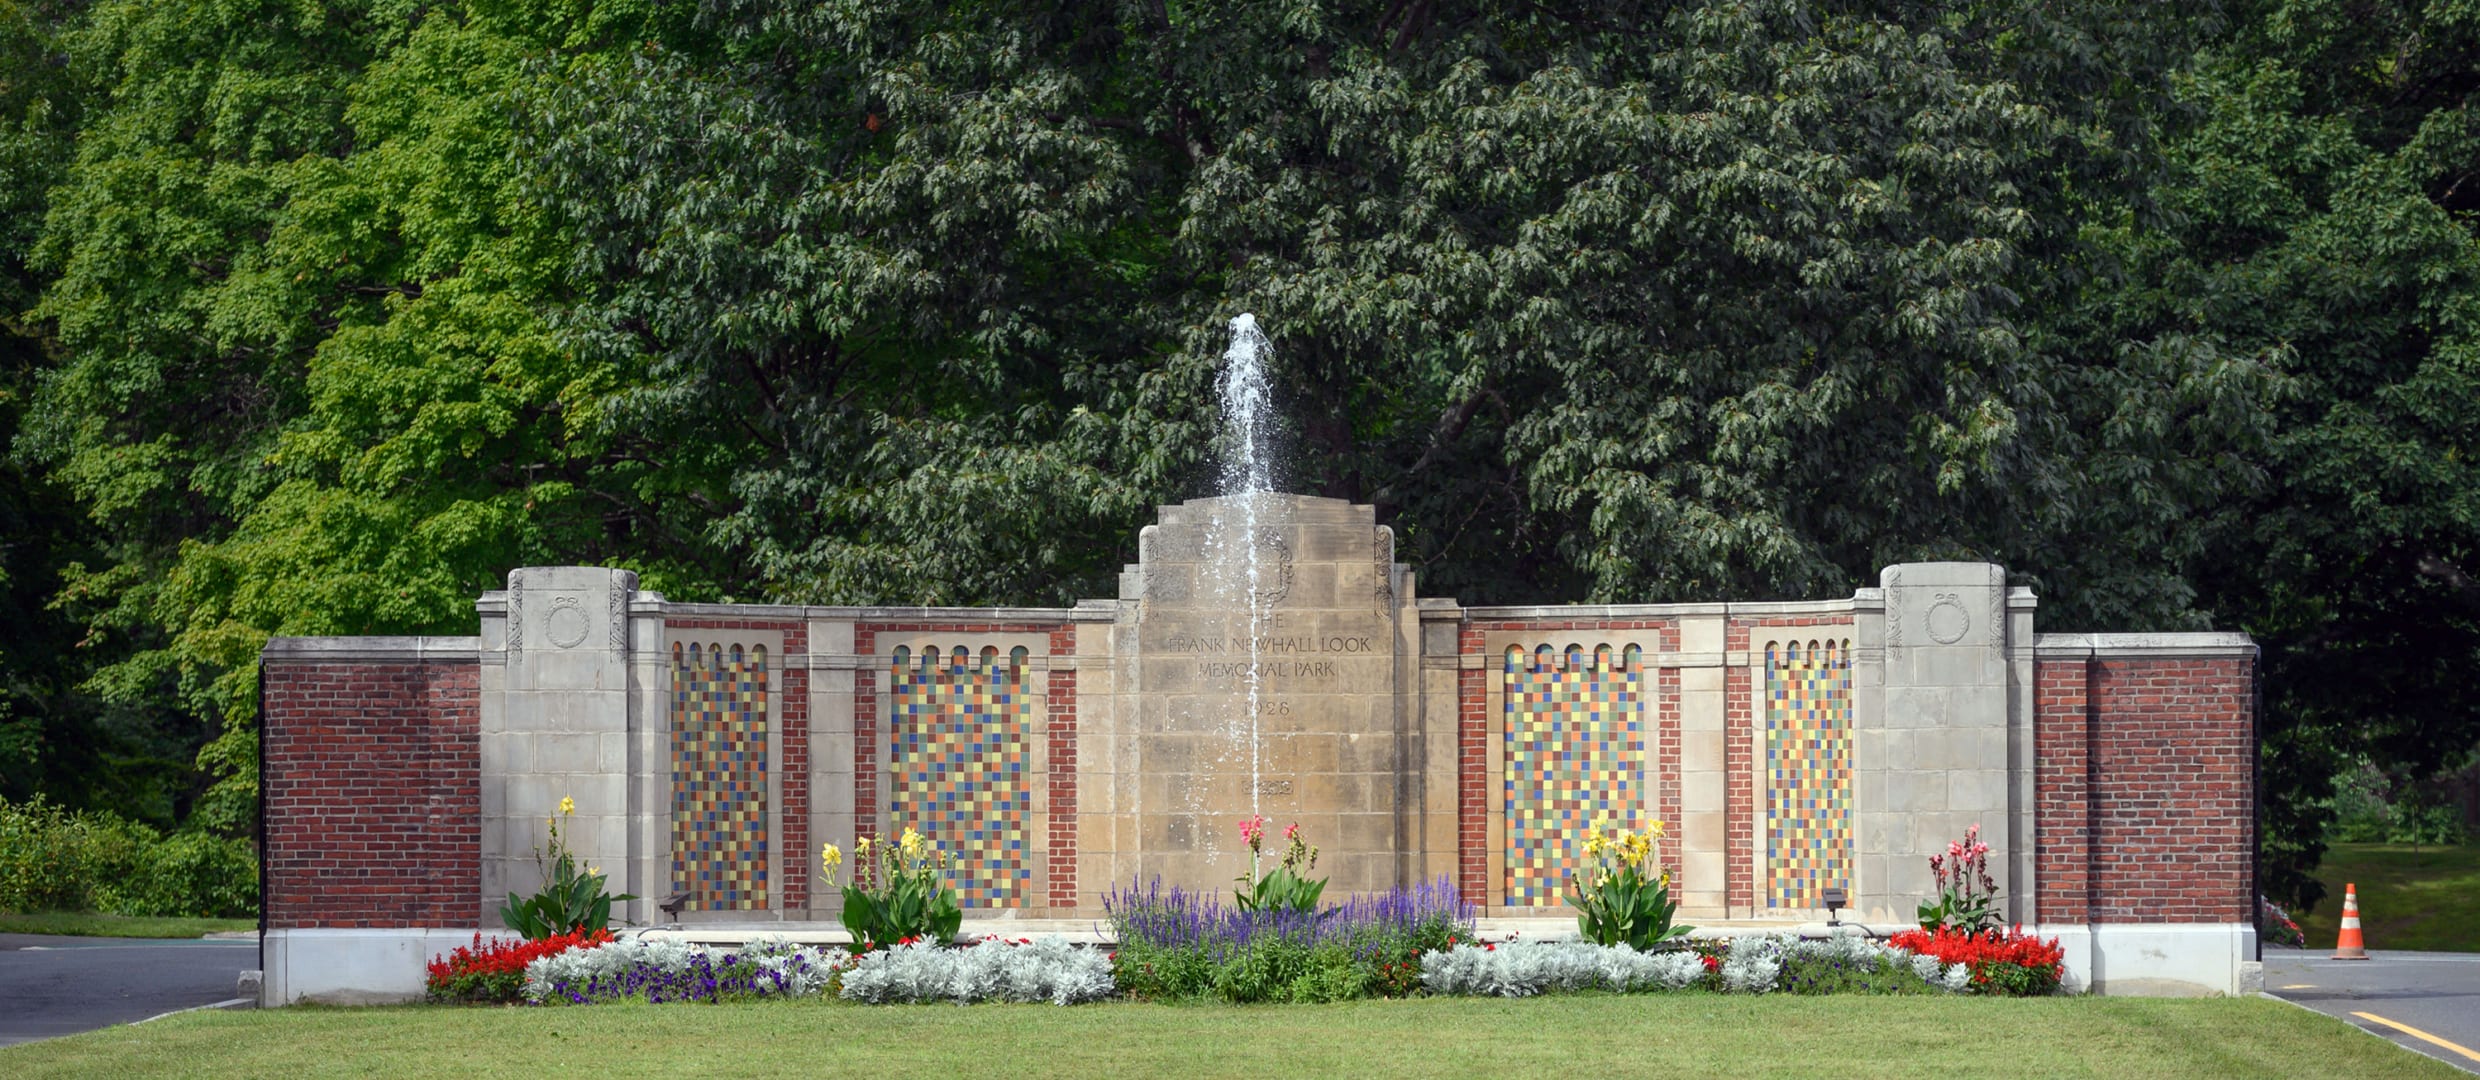 Brick and tile fountain